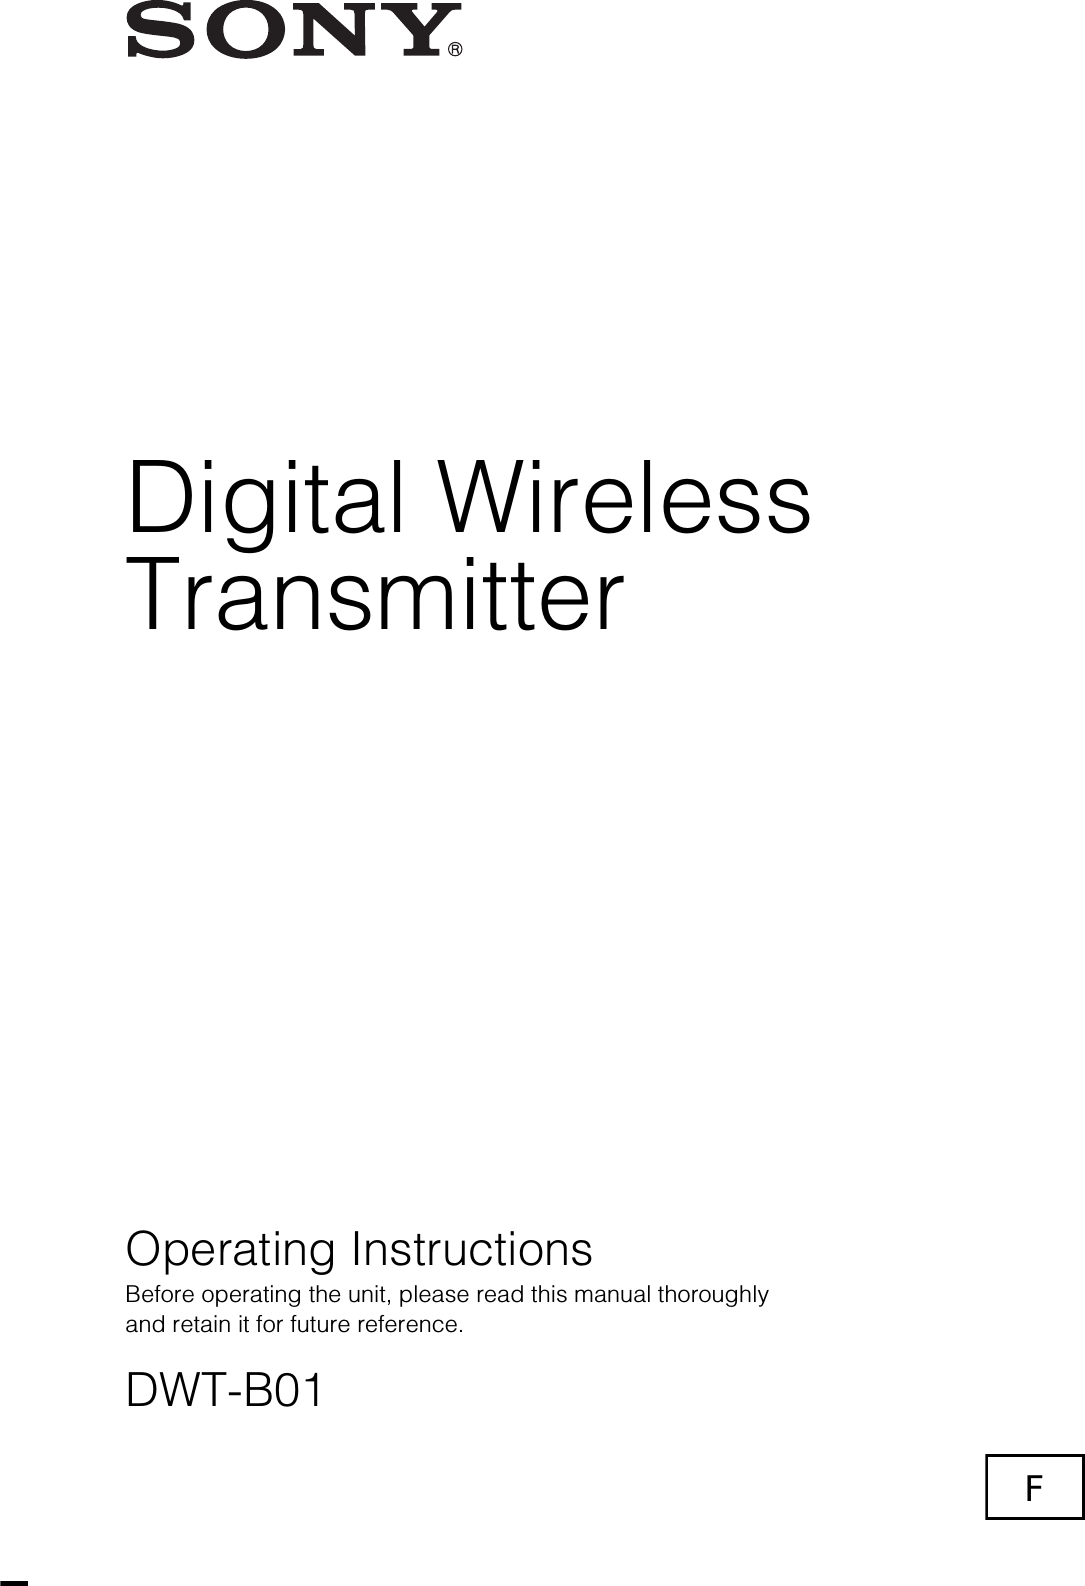 3-873-945-12 (1)© 2008 Sony CorporationDigital WirelessTransmitterOperating InstructionsBefore operating the unit, please read this manual thoroughly and retain it for future reference.DWT-B01The supplied CD-ROM includes the Operating Instructions for the DWT-B01 digital wireless transmitter (English, French, German, Italian, Spanish, and Japanese versions) and the frequency lists (English and Japanese versions) in PDF format. For more details, see “Using the CD-ROM manual” on page 21.F